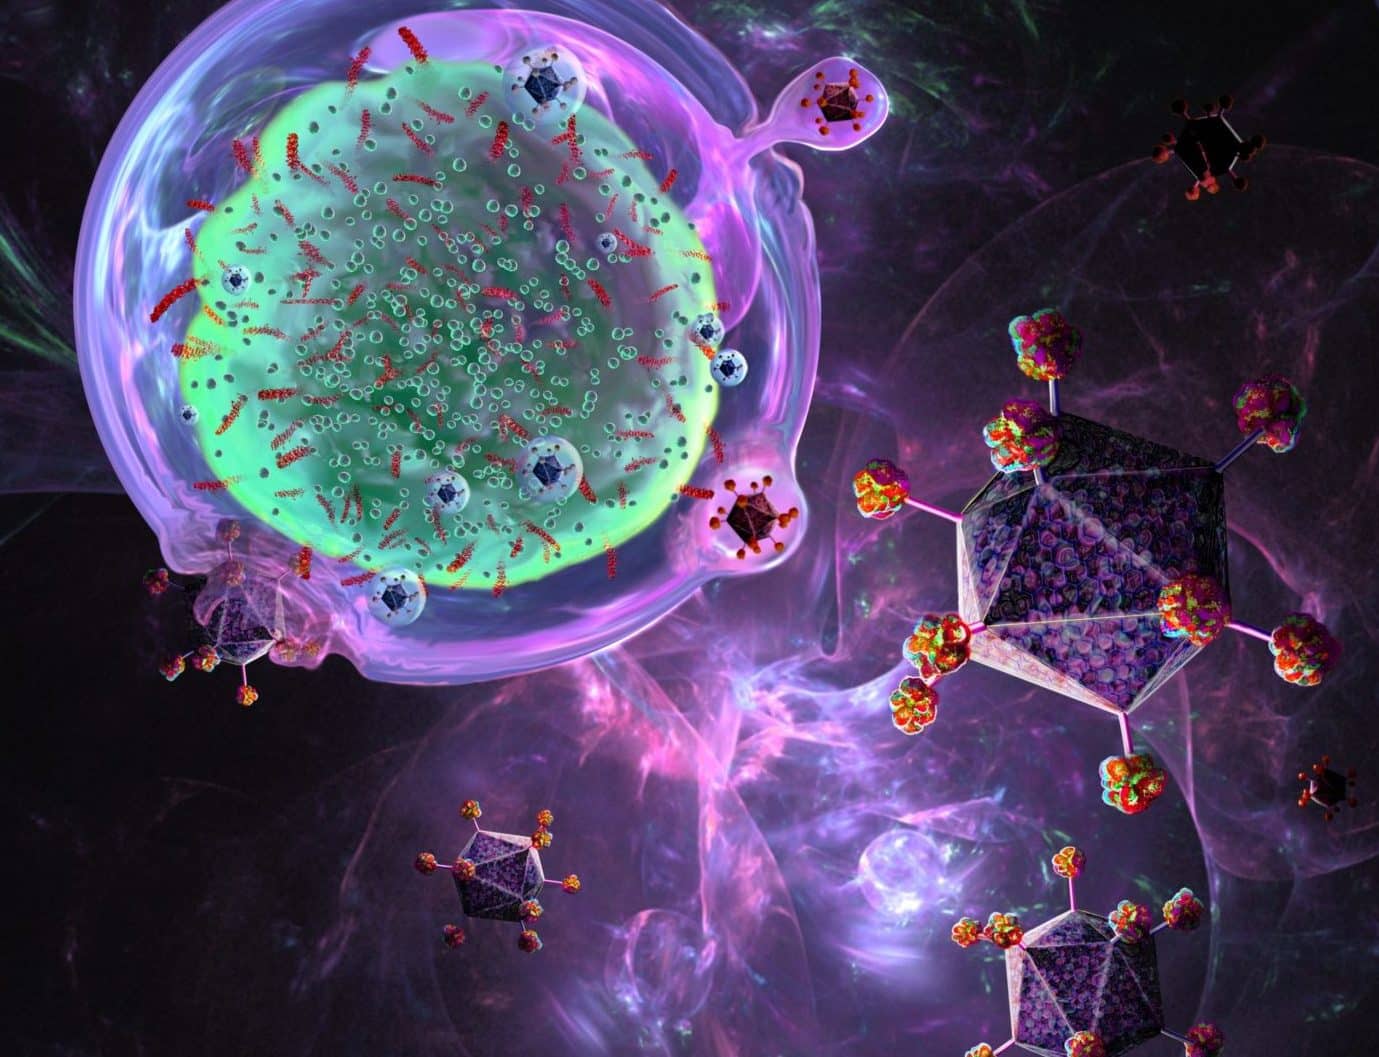 Illustration of CAR (chimeric antigen receptor) T cell immunotherapy, a process that is being developed to treat cancer. T cells (one at upper left), part of the body's immune system, are taken from the patient and have their DNA (deoxyribonucleic acid) modified by viruses (purple) so that they produce chimeric antigen receptor (CAR) proteins. These proteins will be specific to the patient's cancer. The modified T cells are then multiplied in the laboratory before being reintroduced to the patient.